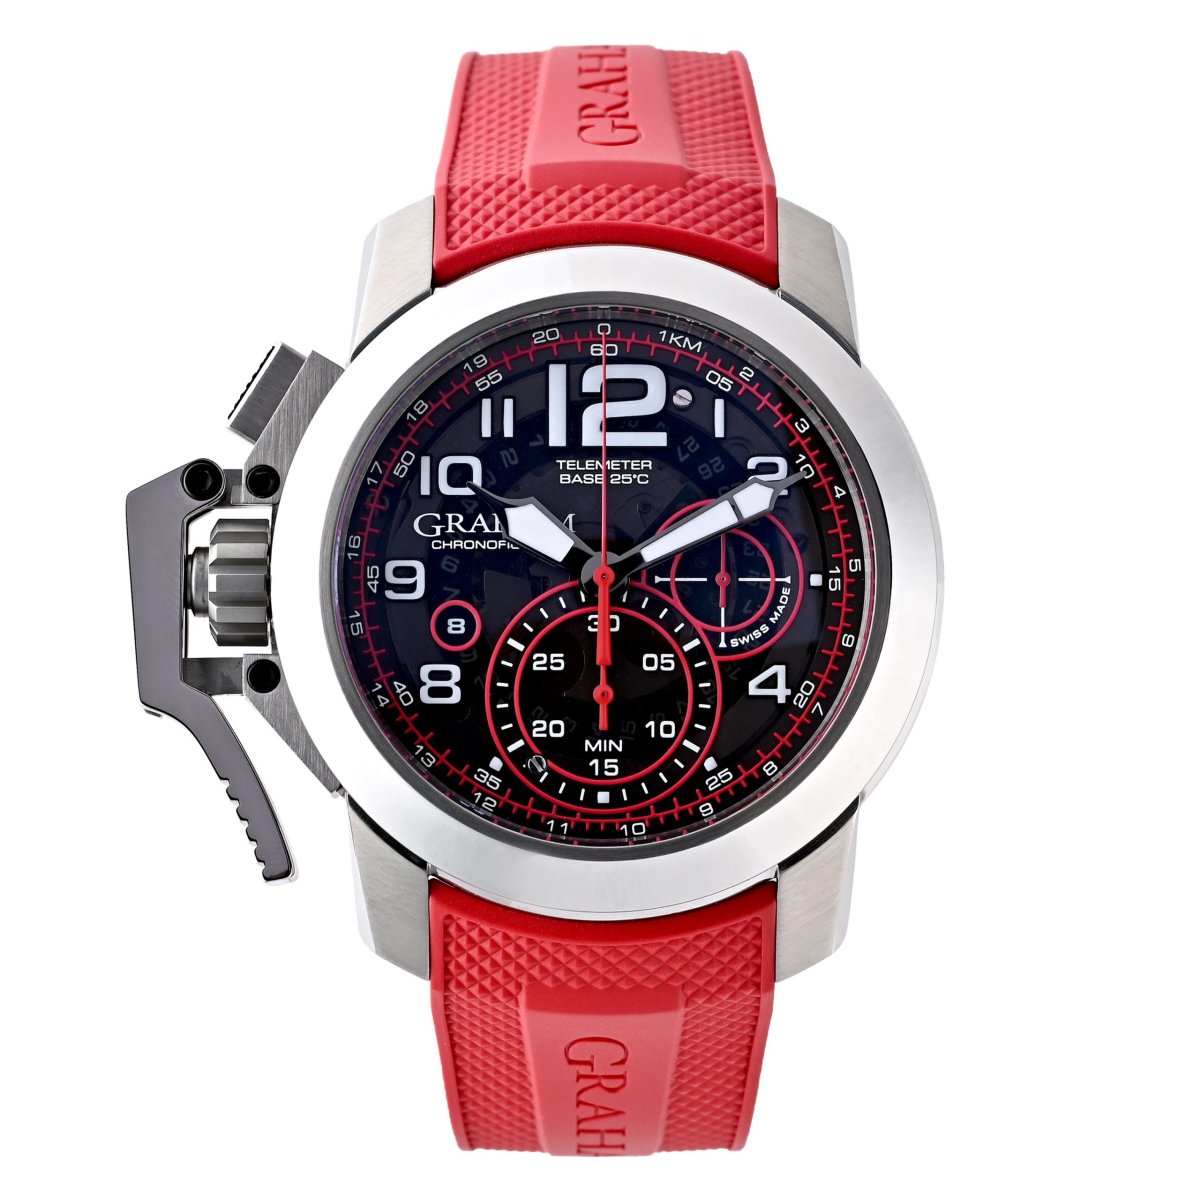 CHRONOFIGHTER TARGET (JAPAN SPECIAL EDITION)